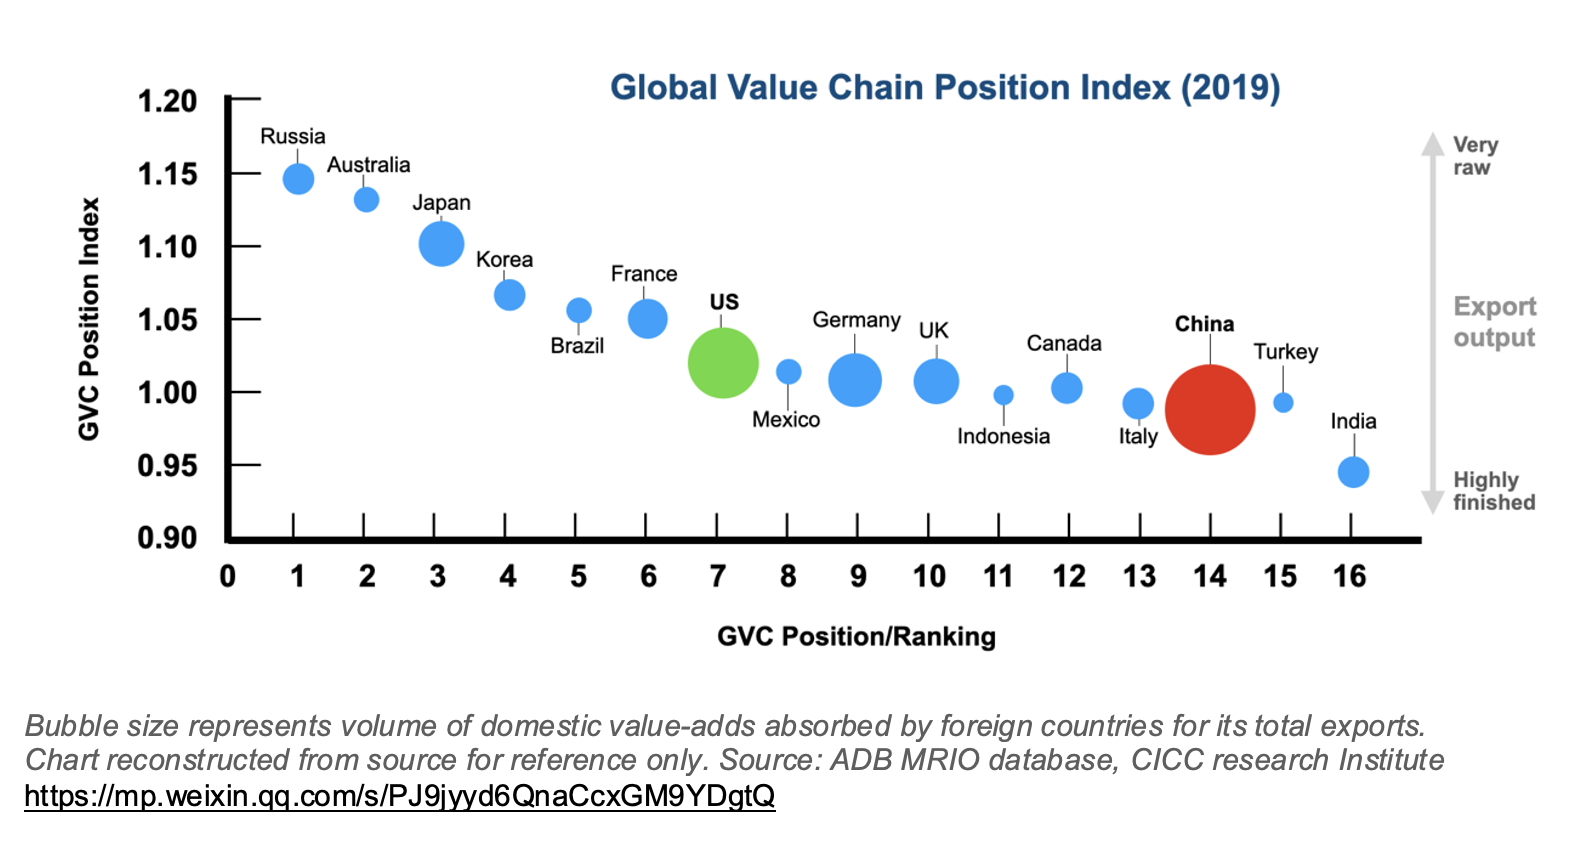 Graph showing large economies' postioning in the global value chain index.